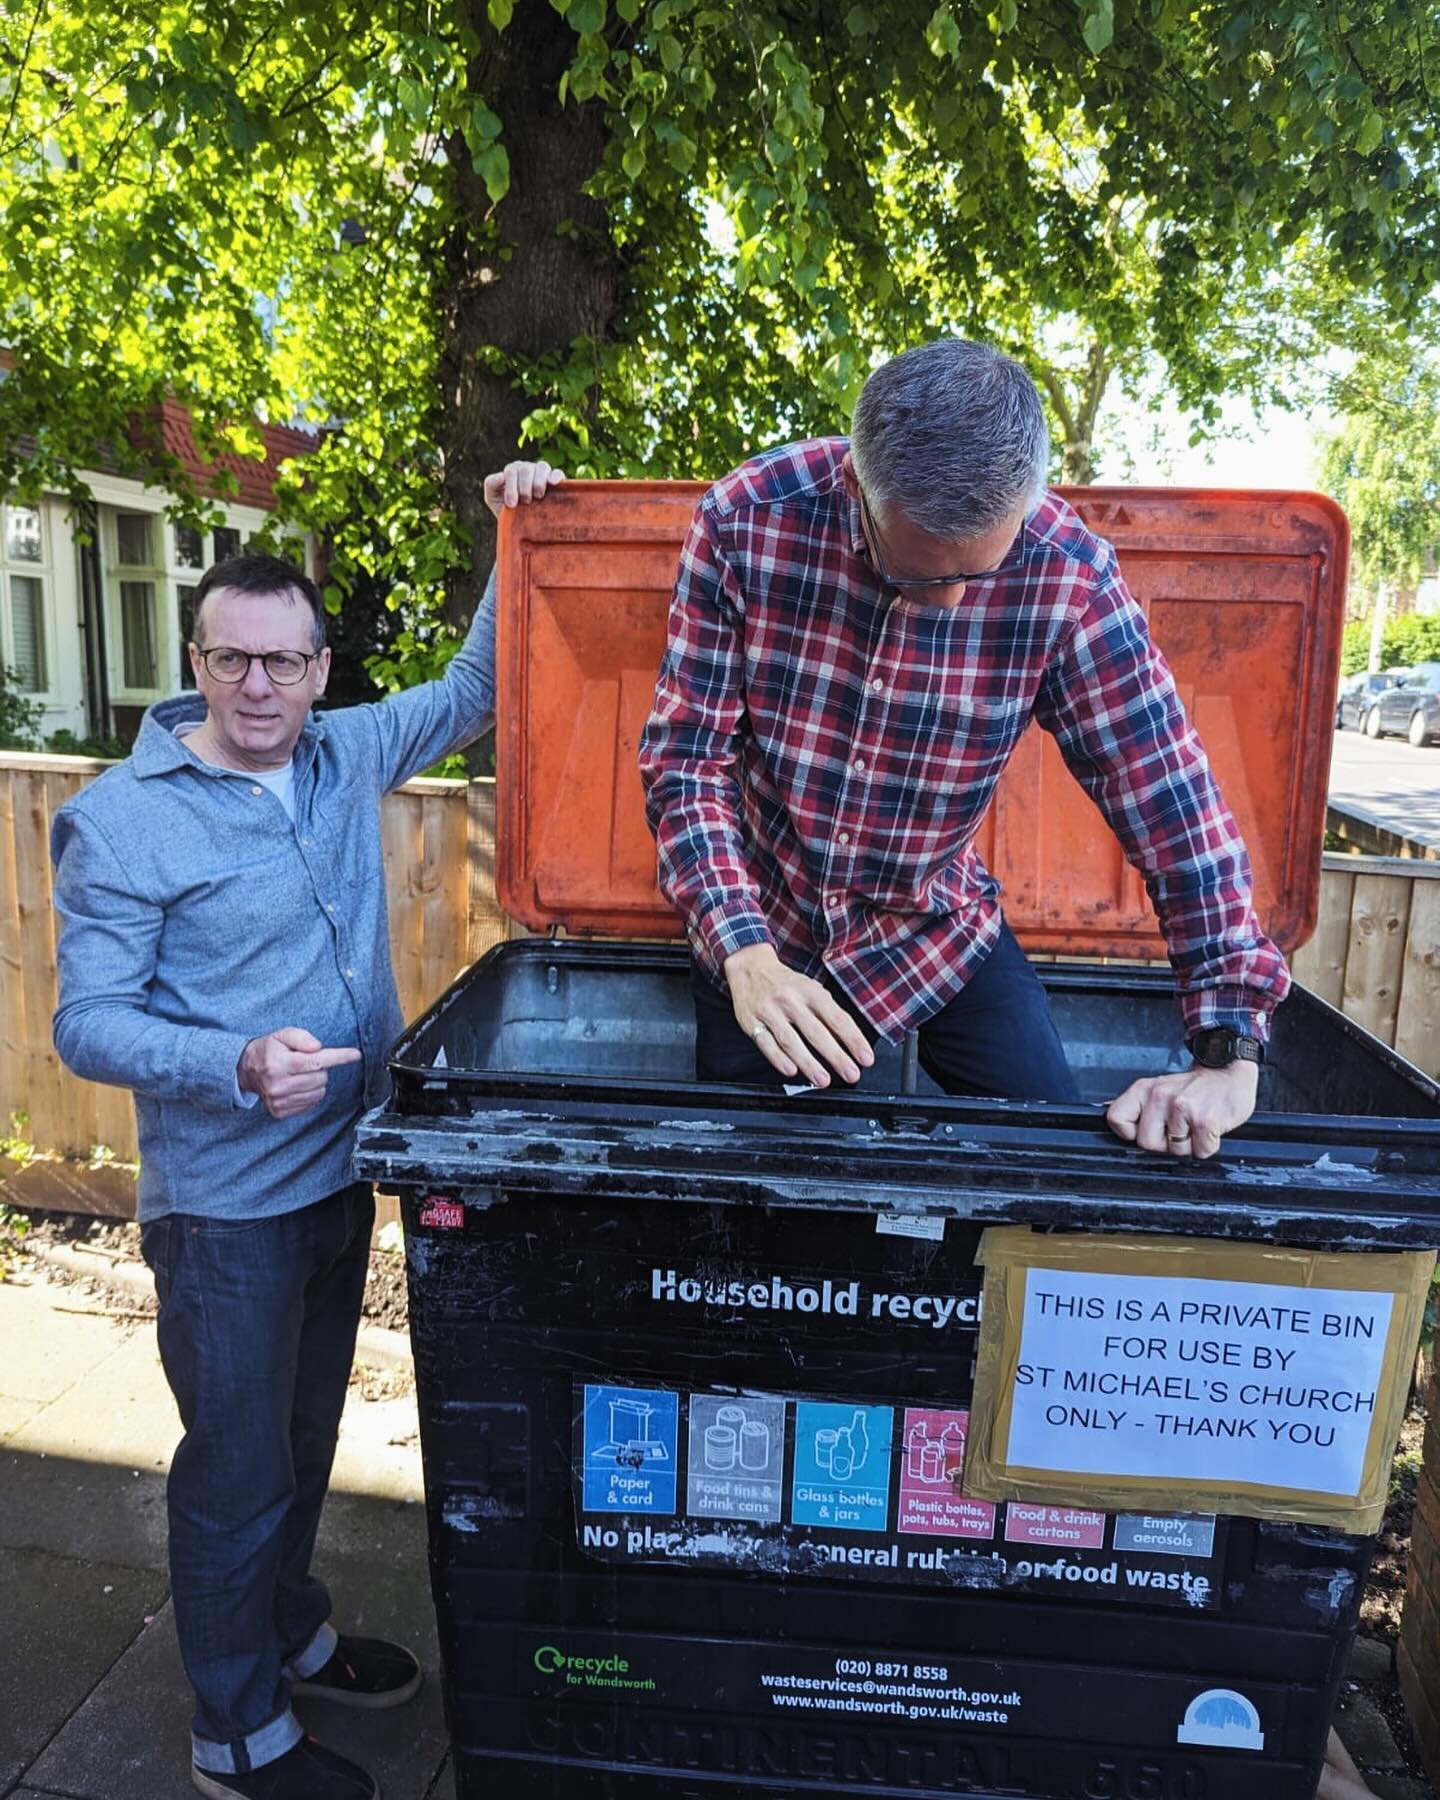 The things they don&rsquo;t mention in a vicar&rsquo;s job description&hellip;
#church #vicar #churchofengland #dioceseofsouthwark #sw18 #southfields #wandsworth #recycling